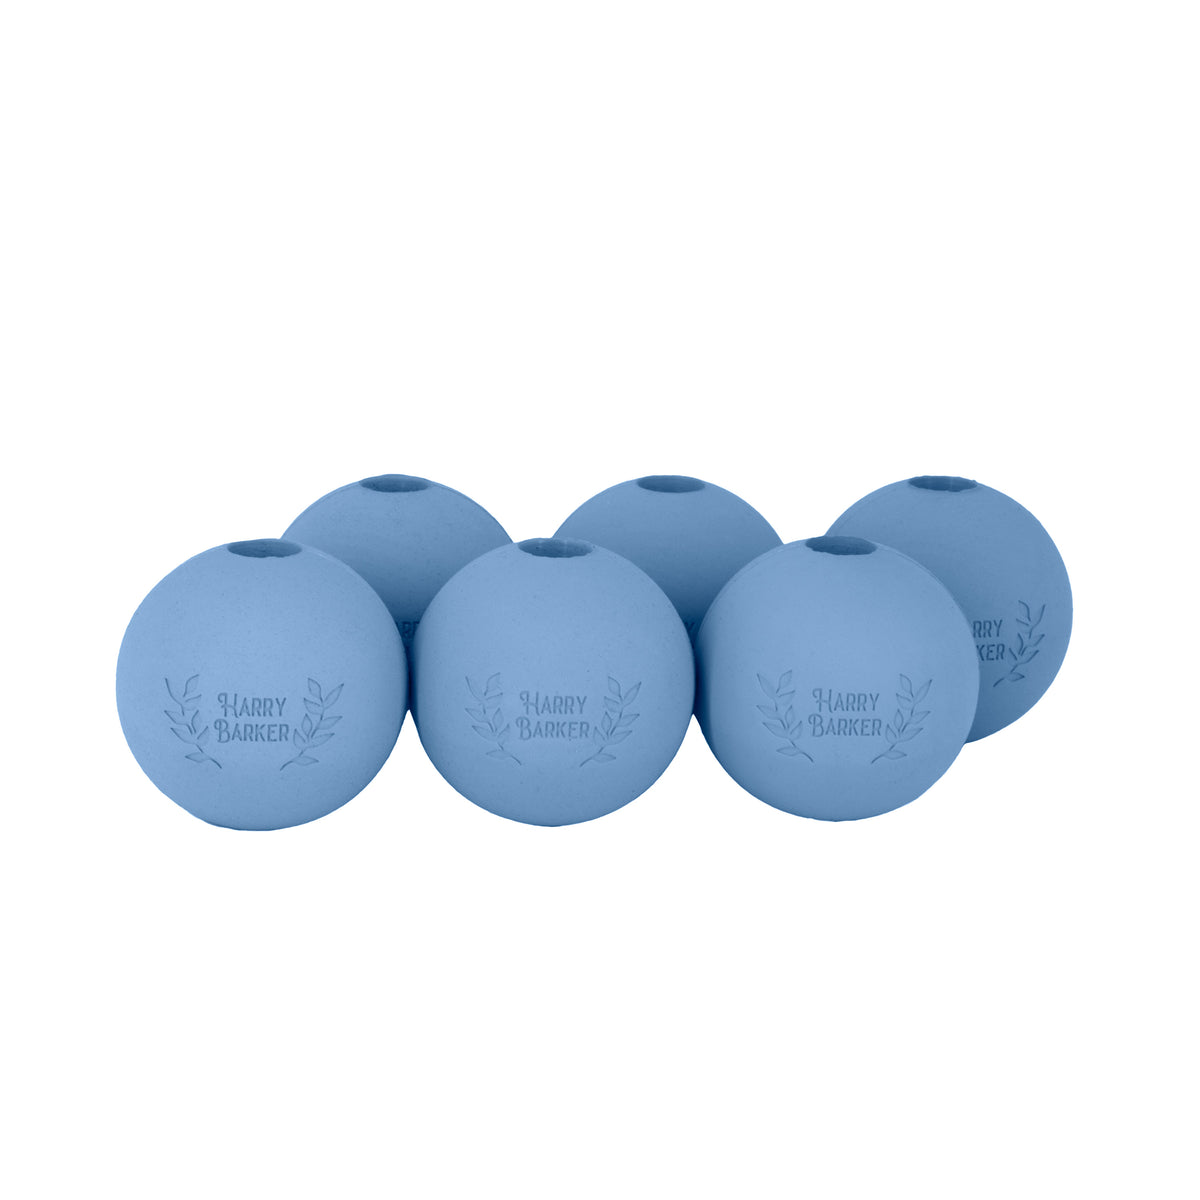 2.5 Inch Value Pack Rubber Balls